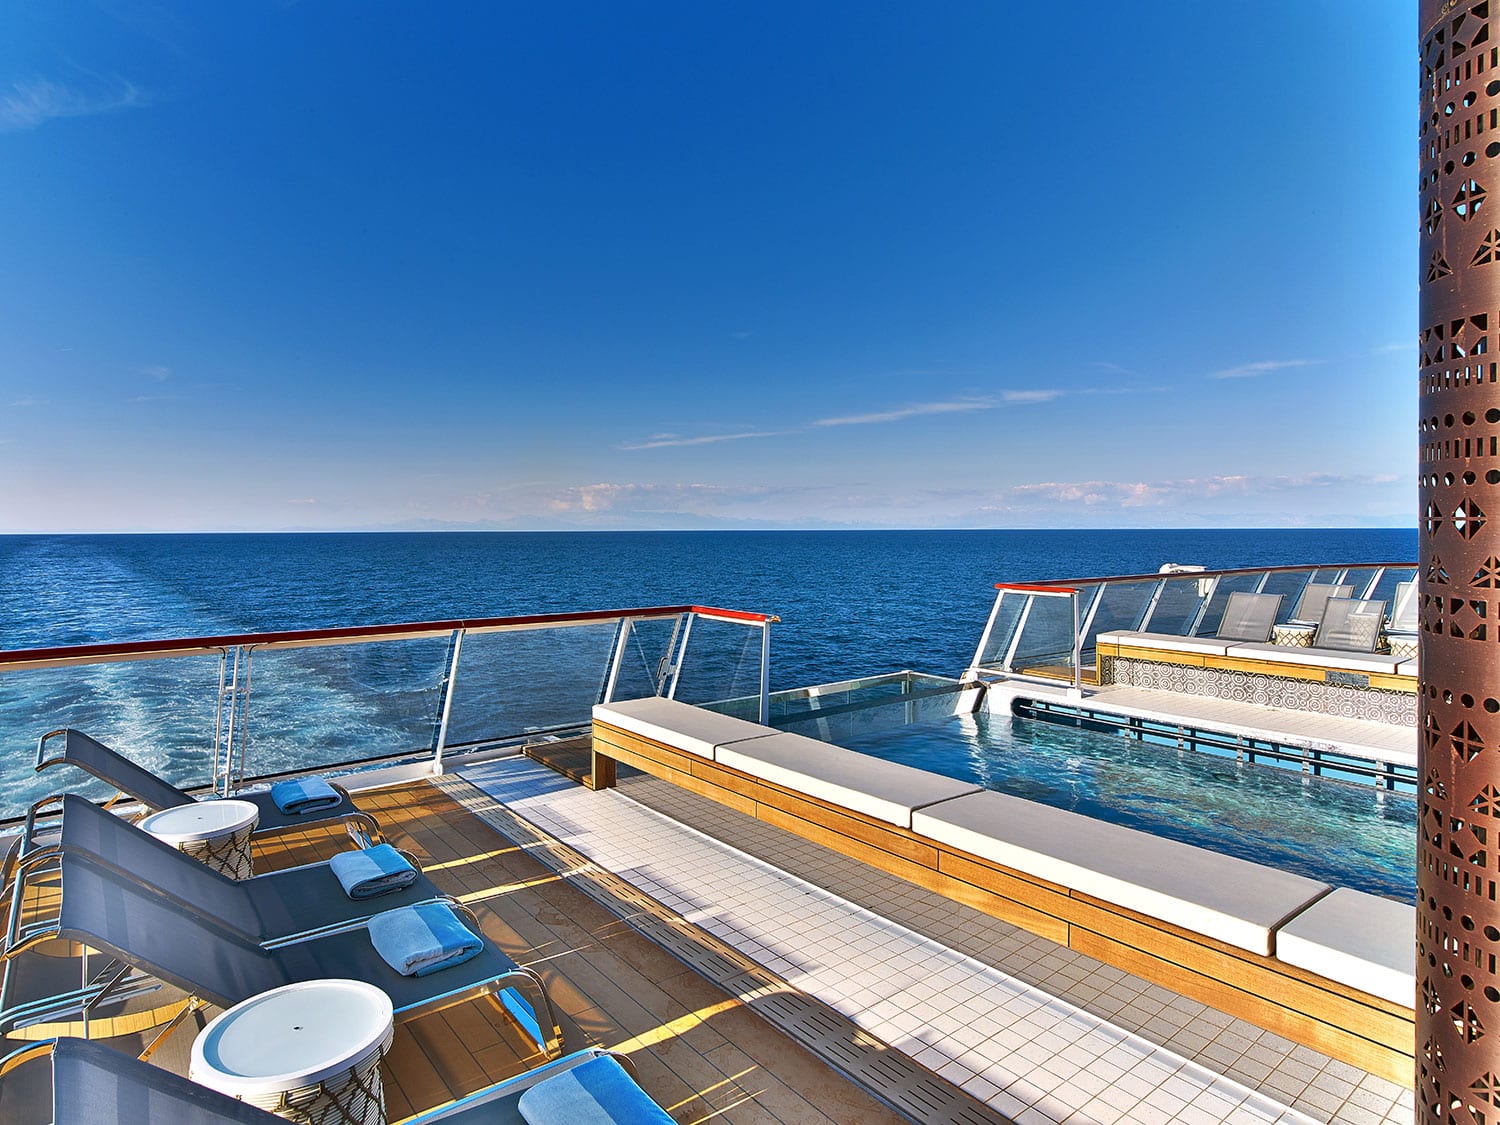 The view from the rear pool deck of the Viking Saturn cruise ship.